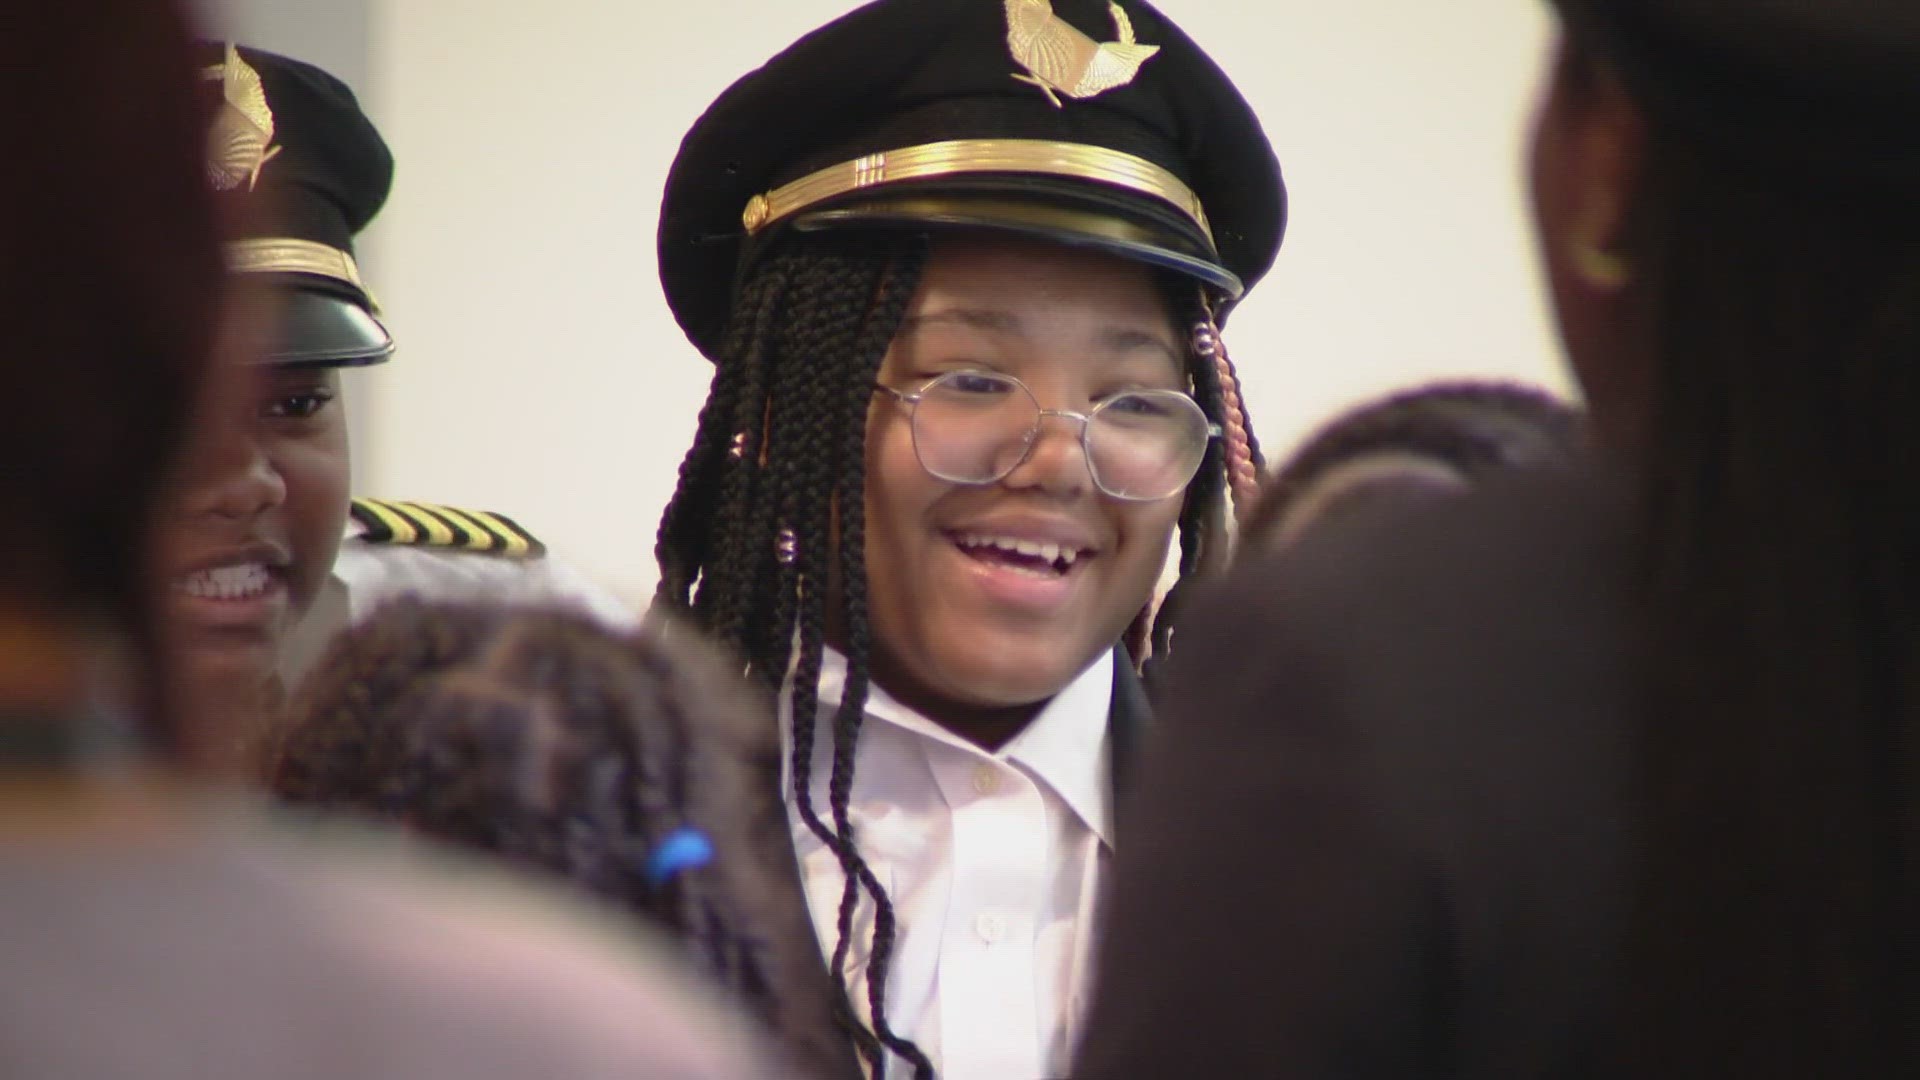 Girls Rock Wings, an annual event for young women of color to learn how to become pilots, held its first event in Denver.